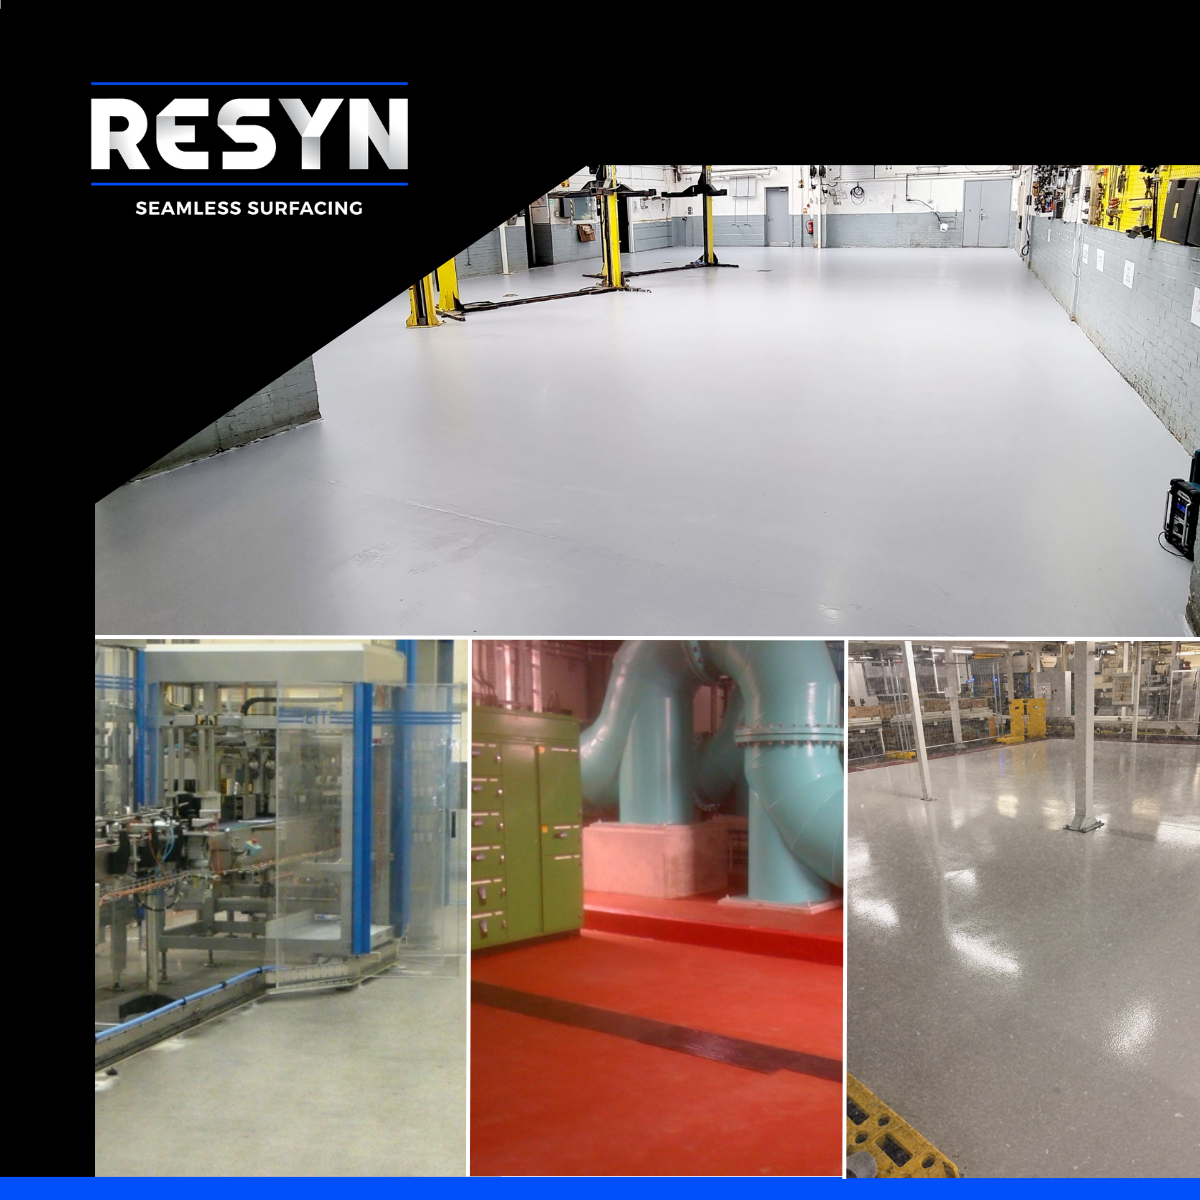 Considering a versatile flooring solution - take a look at resin for an extremely robust floor that will last time and be easier to maintain.